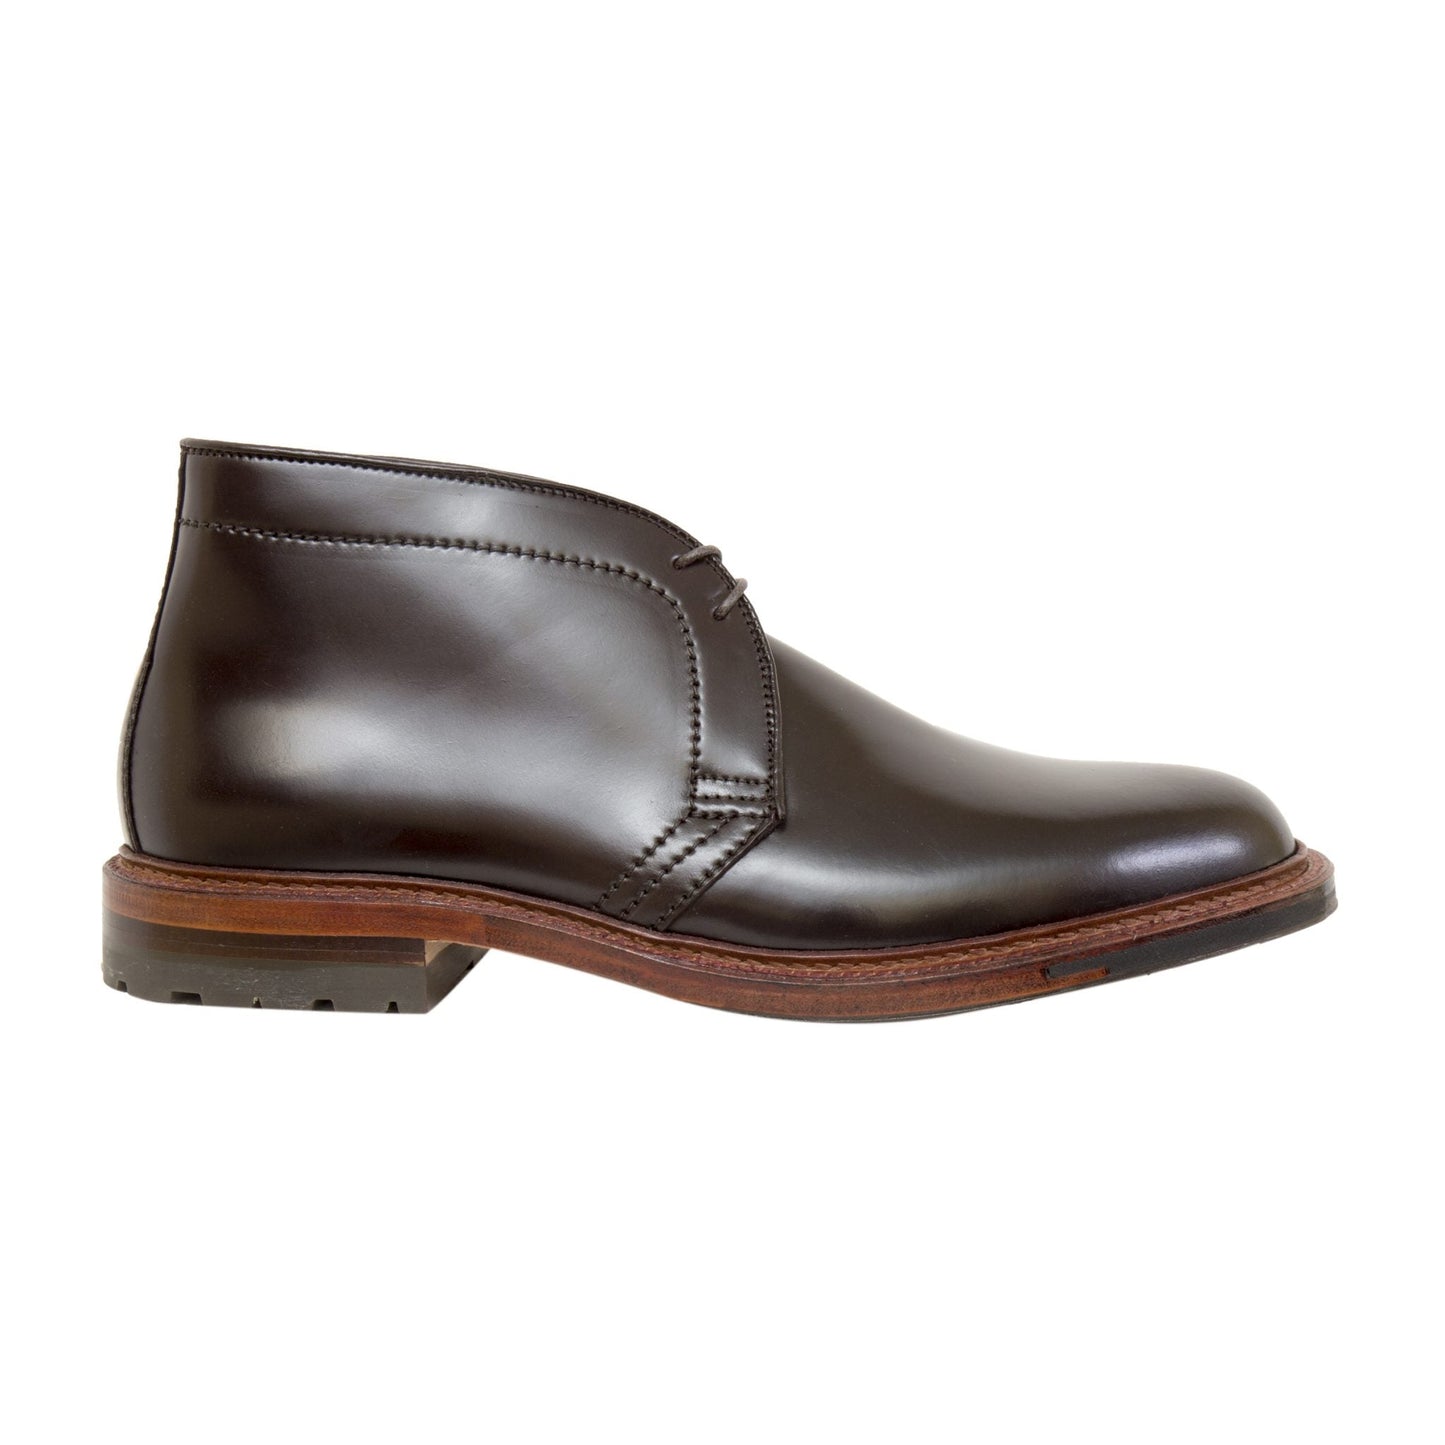 D5706C - Antique Chukka Boot in Color 8 Shell Cordovan